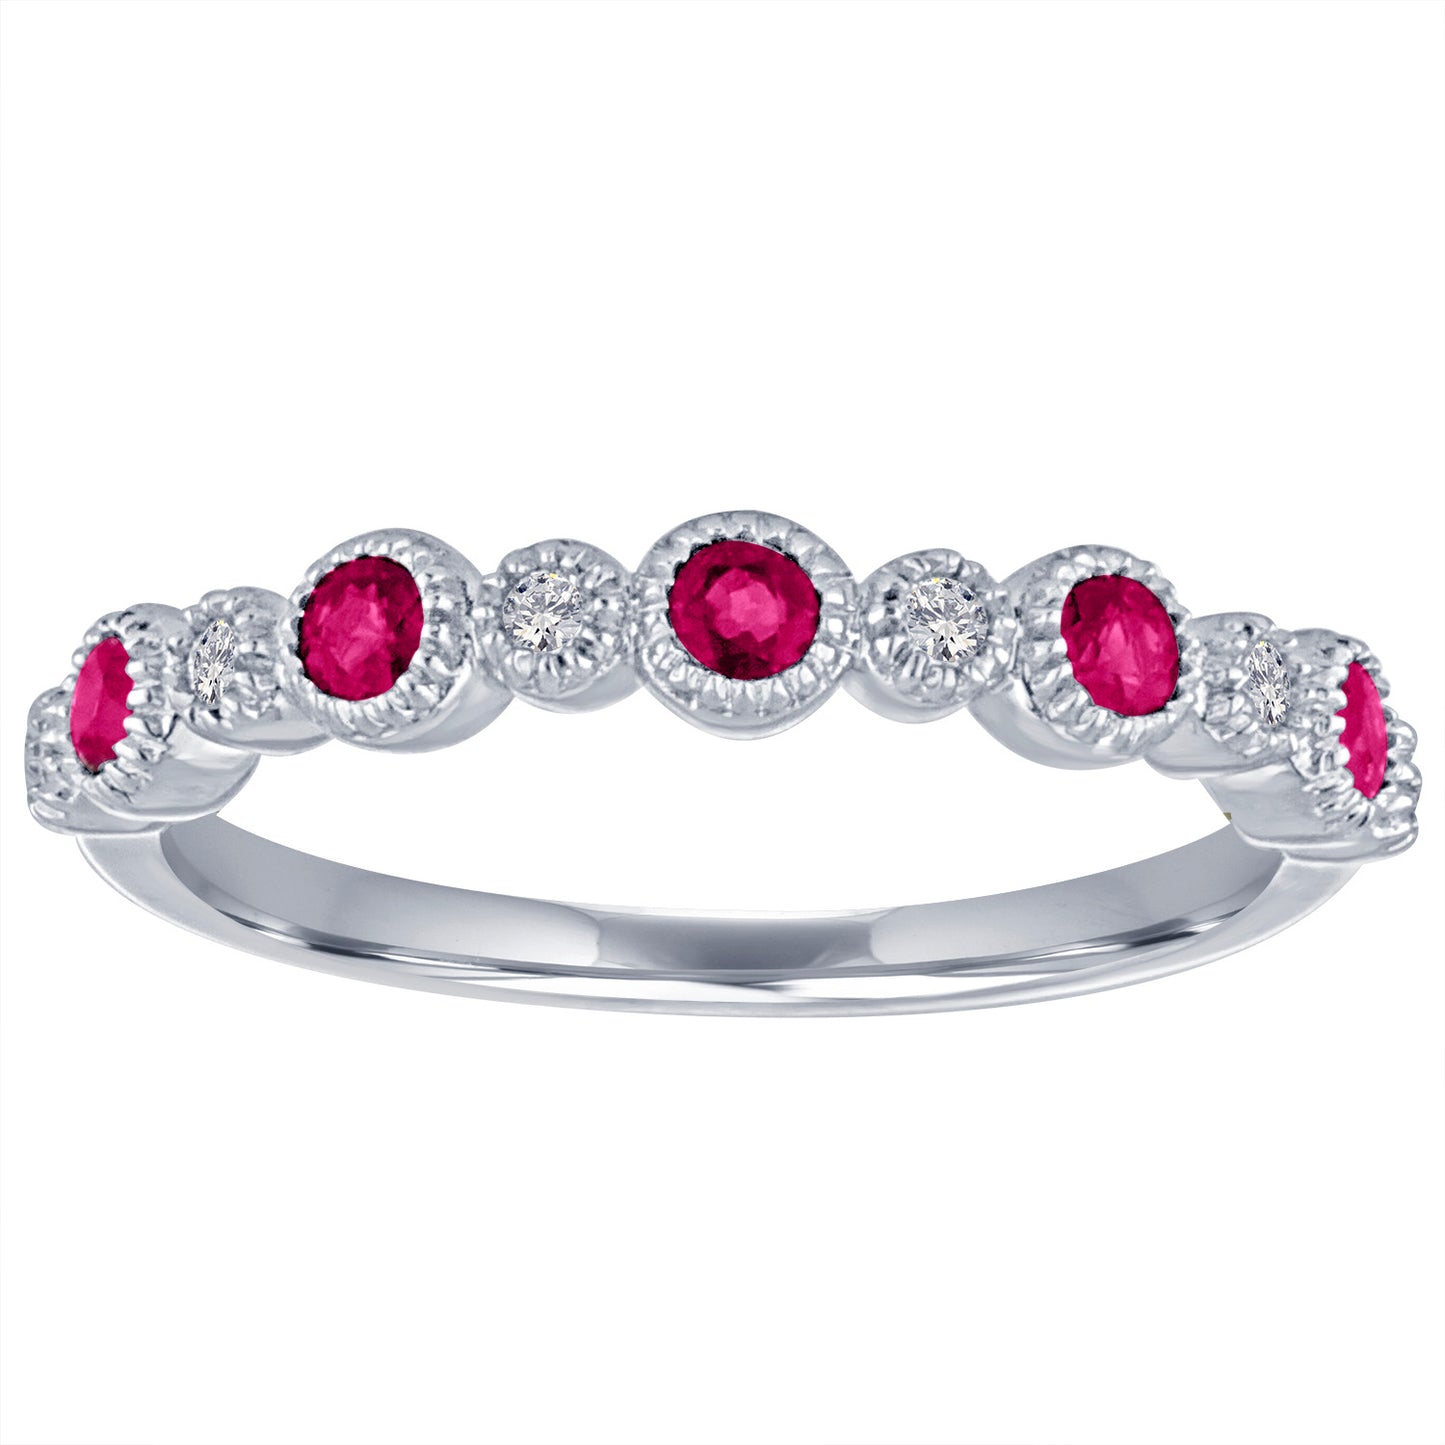 White gold skinny band with large round rubies and small round diamonds. 